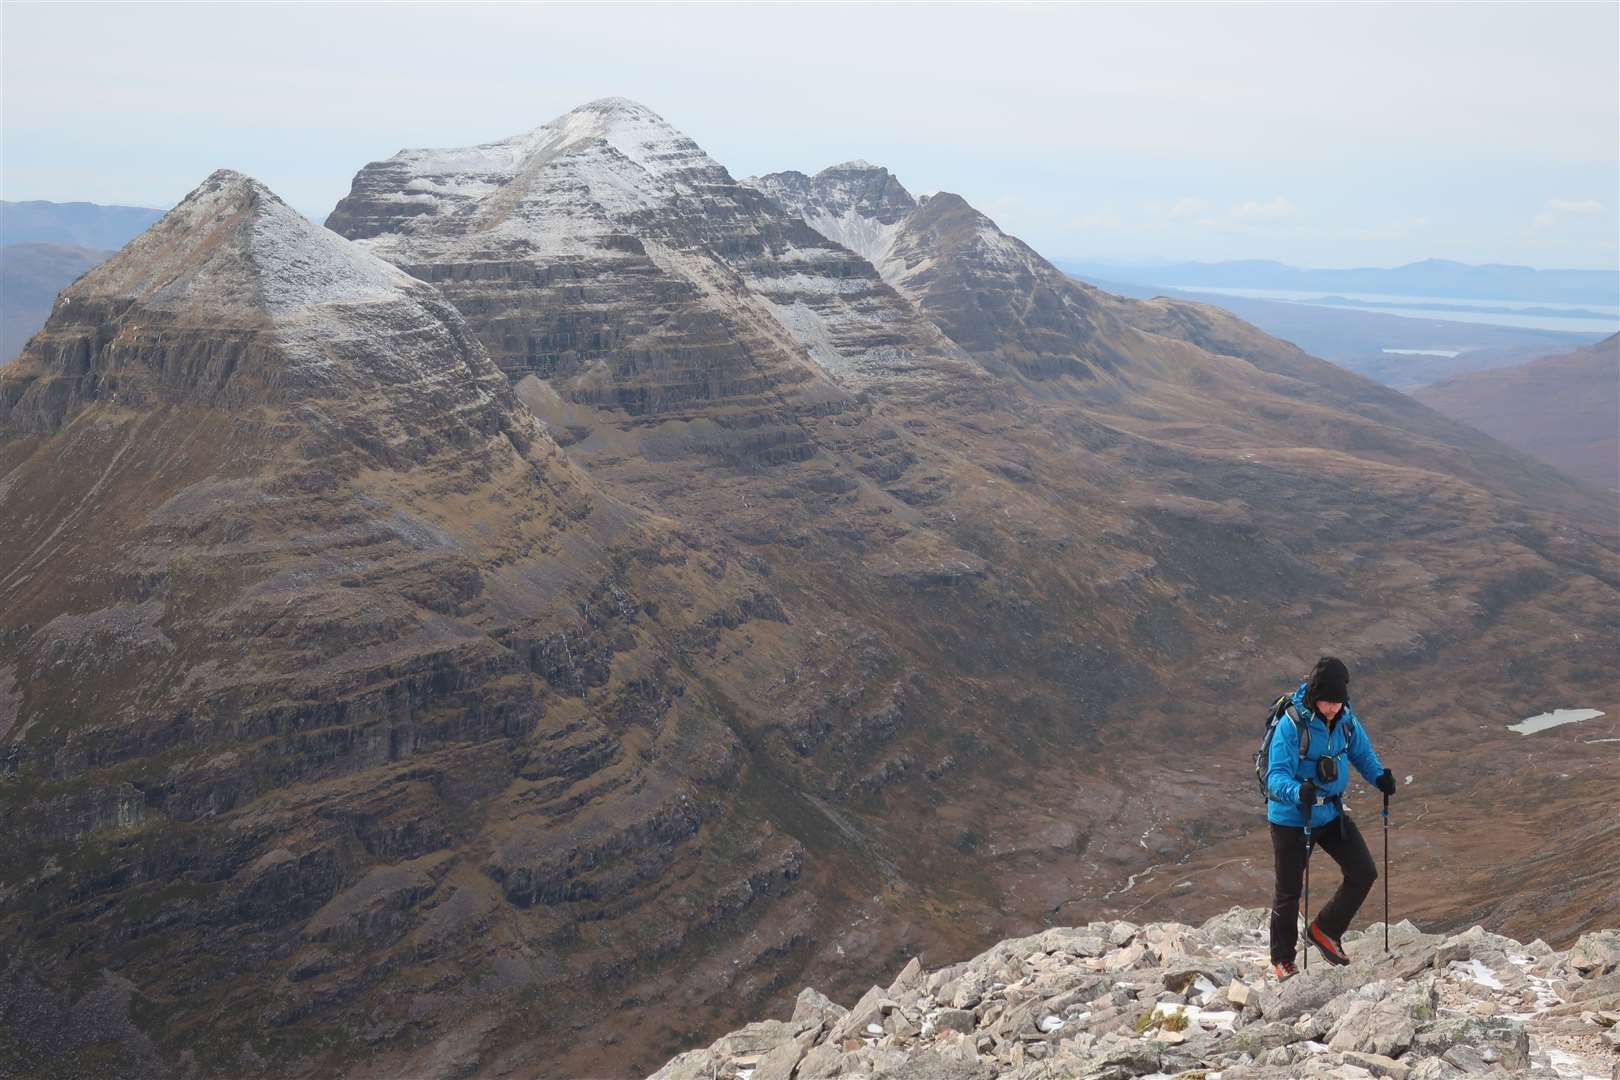 Peter on the Beinn Eighe ridge with Liathach in the background.